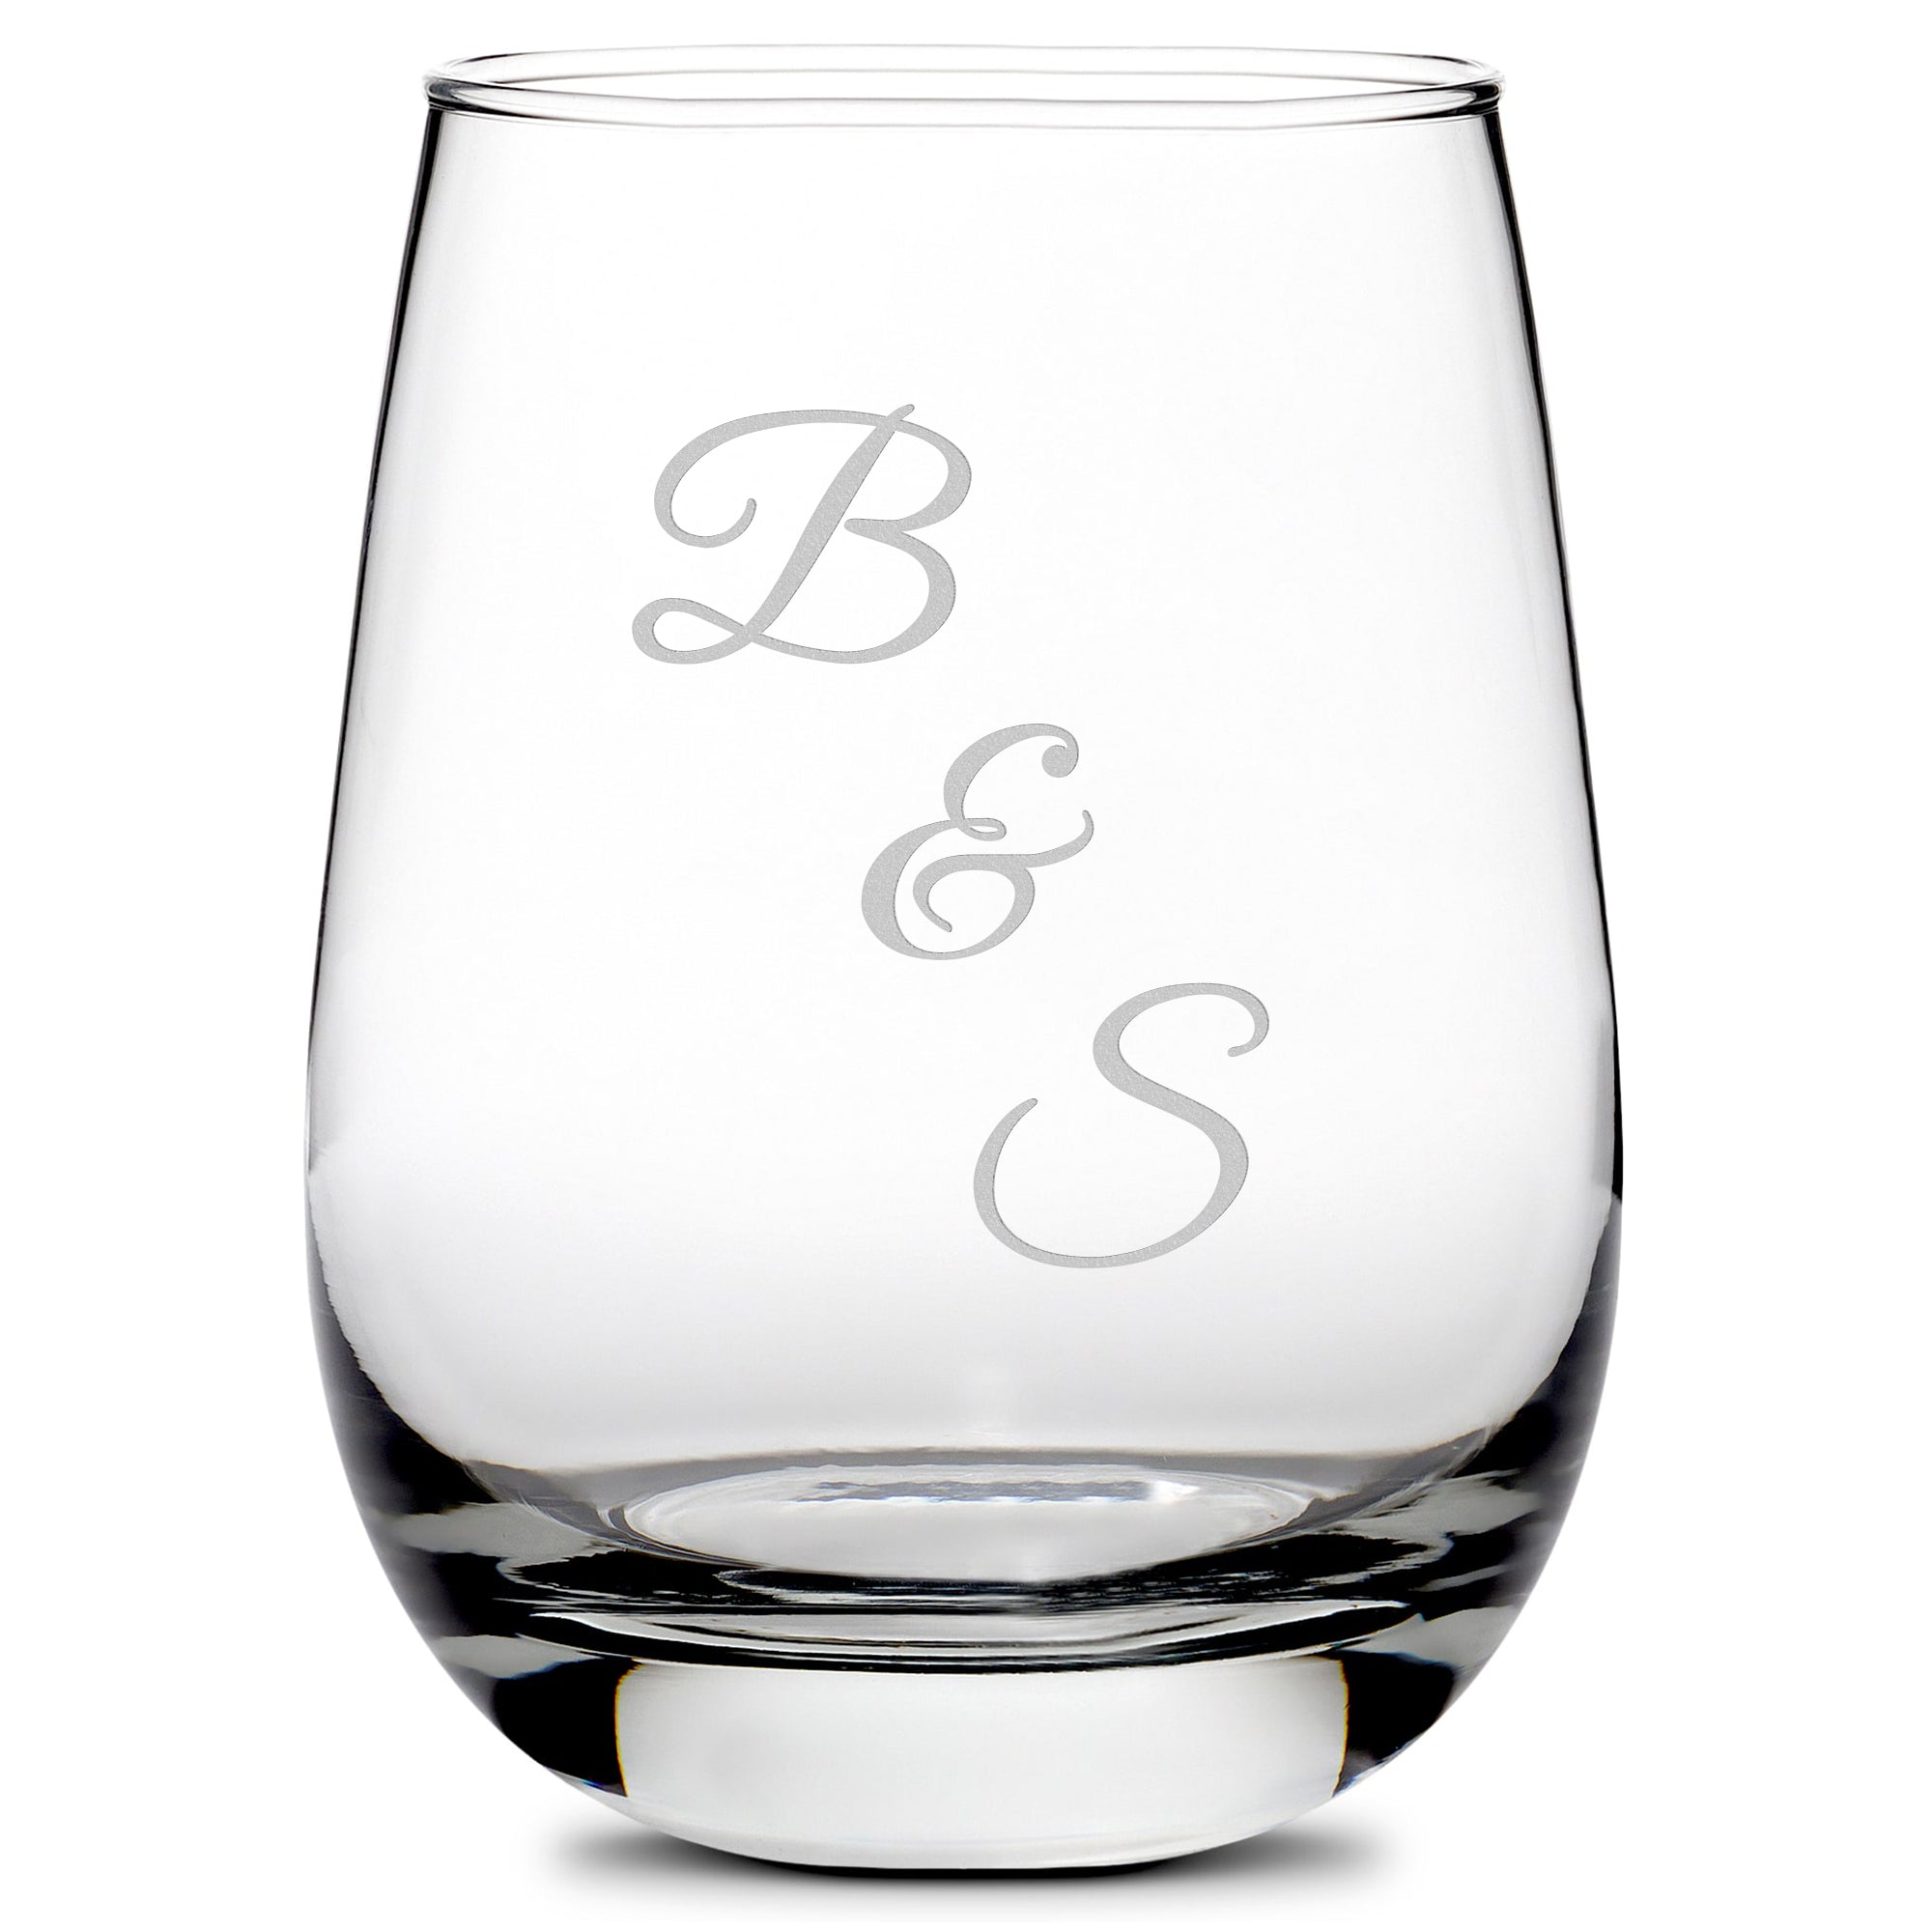 Integrity Bottles, Initials, Stemless Wine Glasses, Handmade, Handblown, Hand Etched Gifts, Sand Carved, 16oz, Laser Etched or Hand Etched